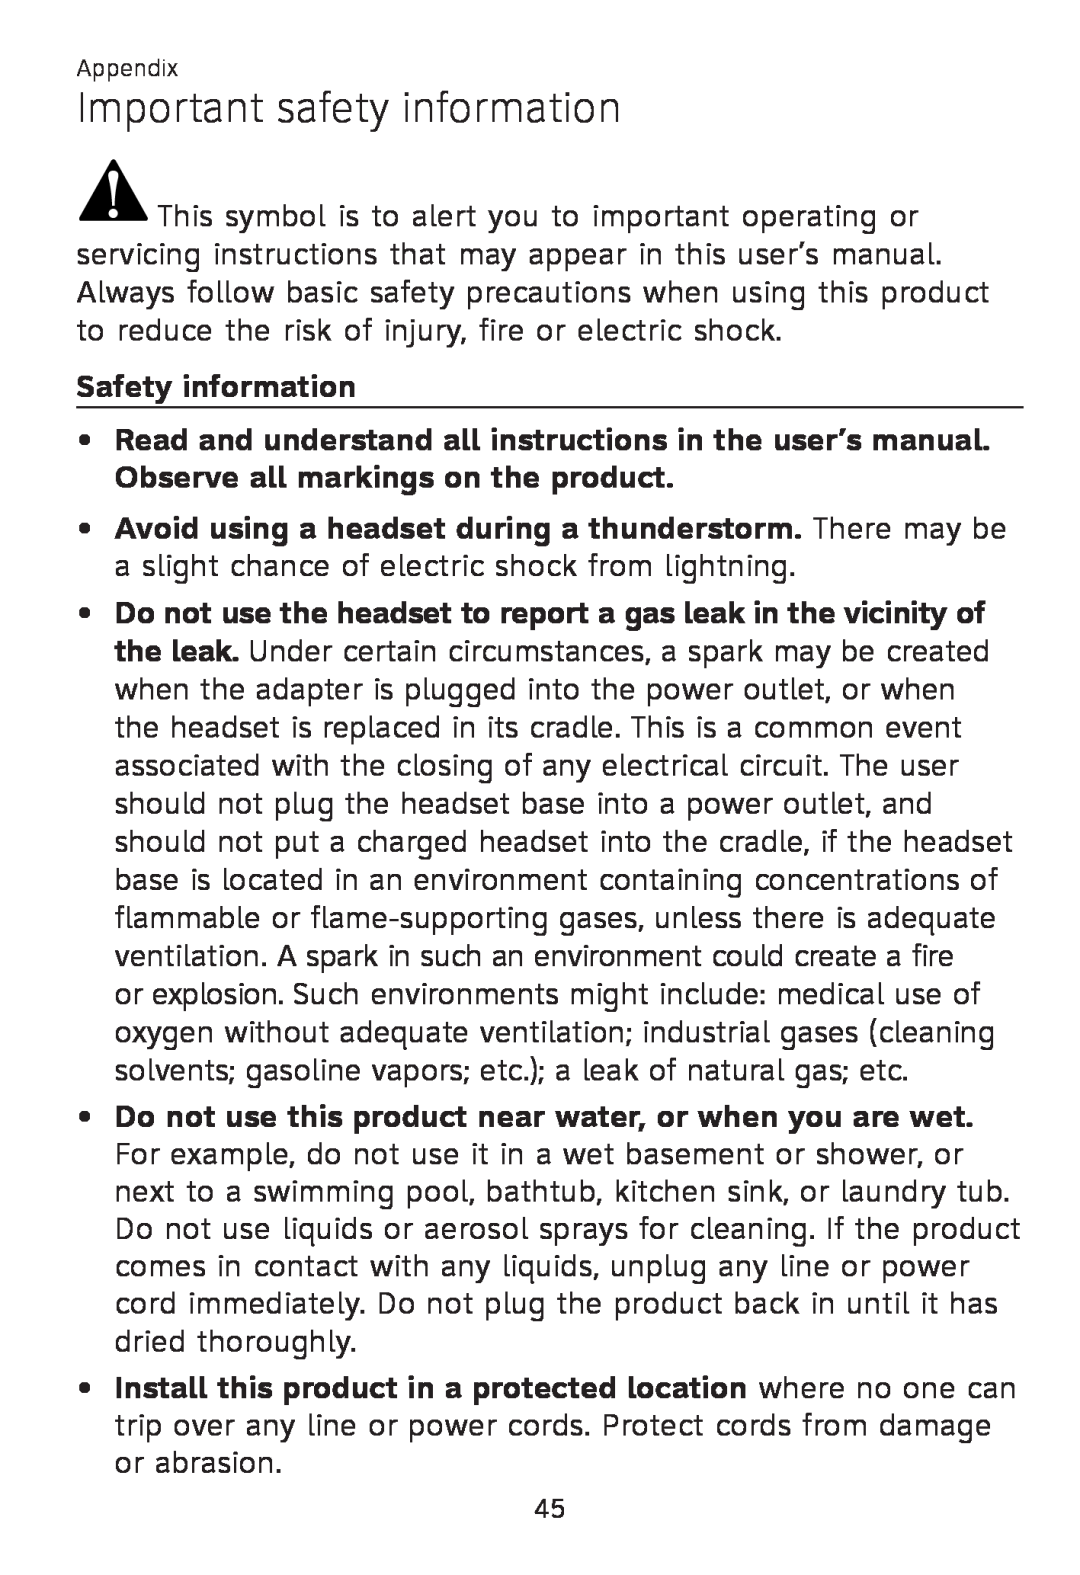 AT&T TL 7610 user manual Important safety information, Safety information 